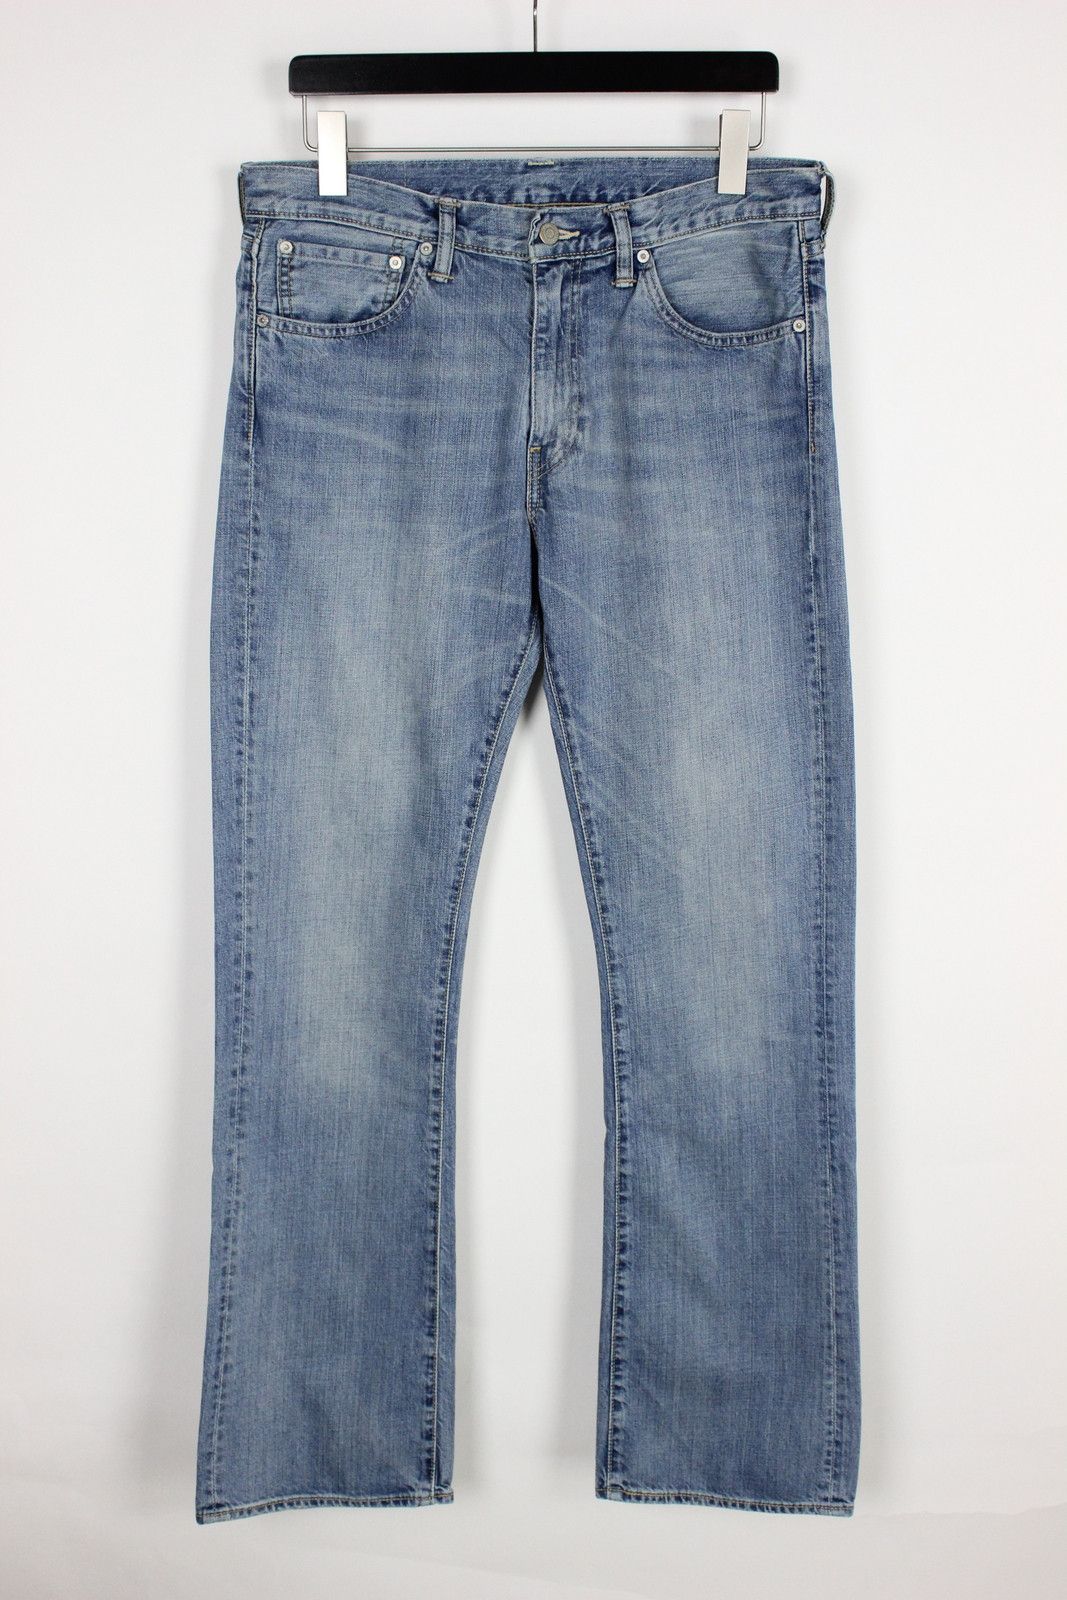 Levi's LEVI STRAUSS & CO. 527 W34/L34 Blue Faded Bootcut Jeans | Grailed